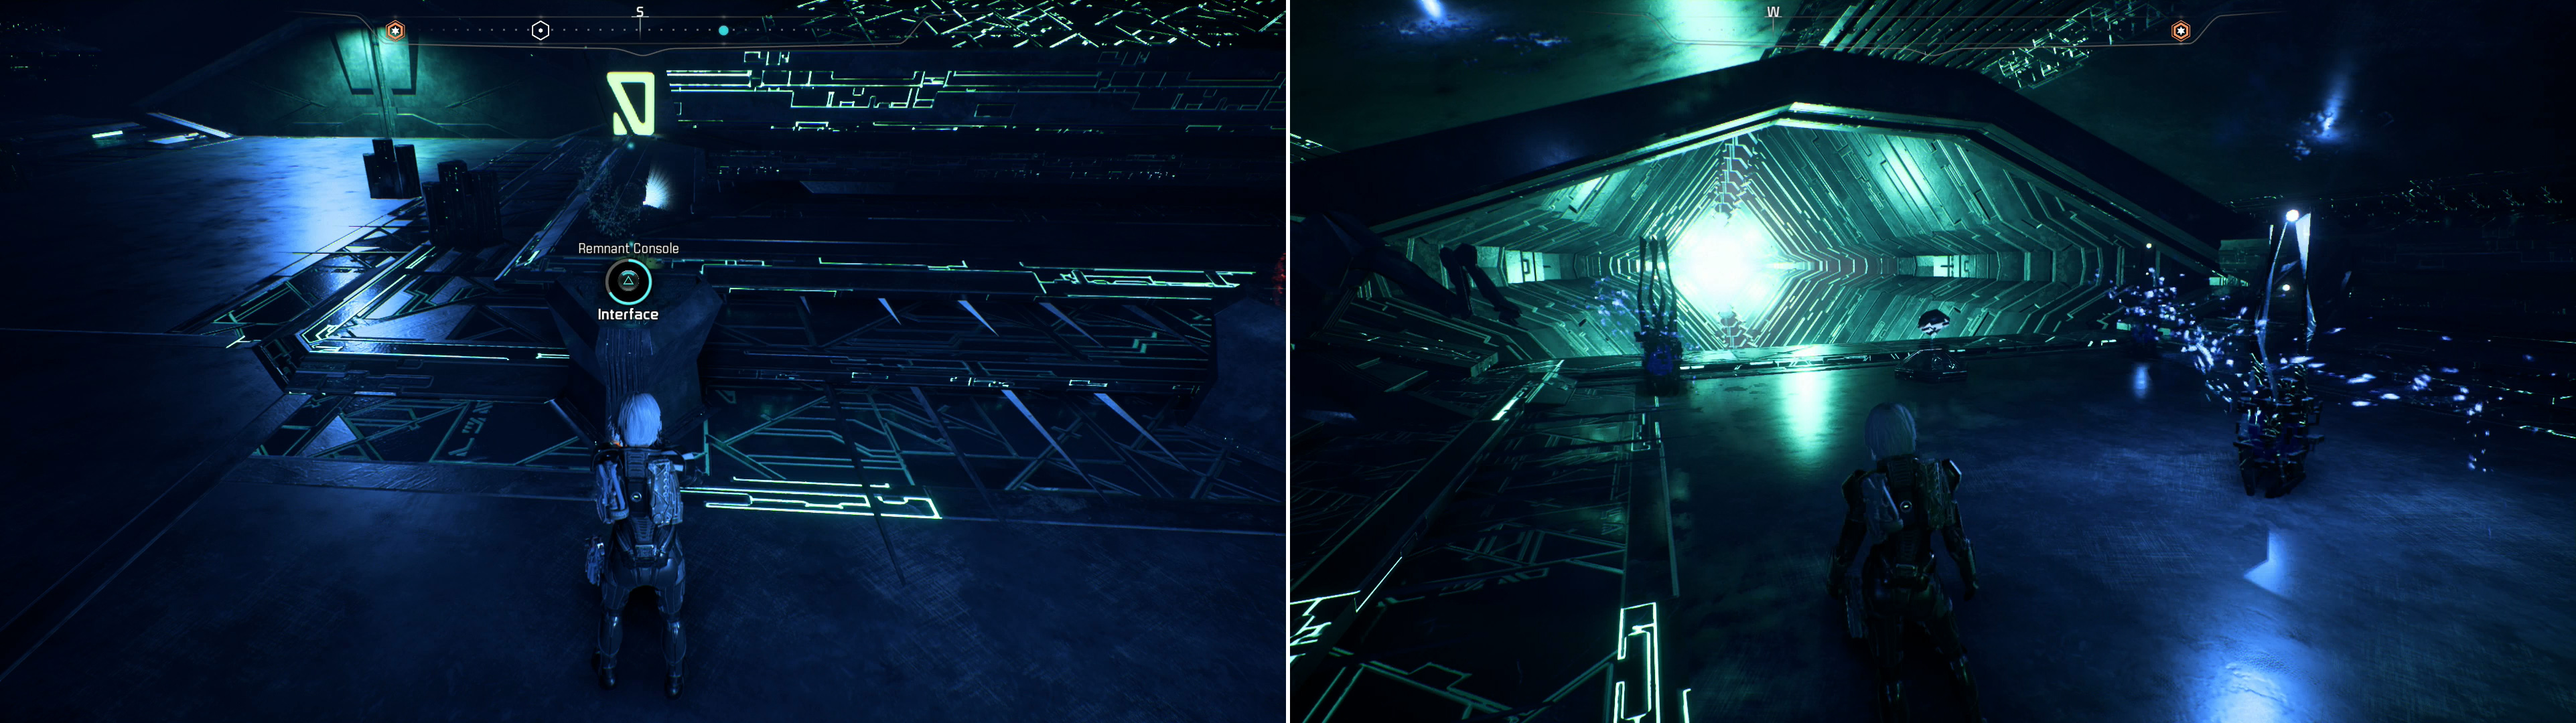 Activate some nearby consoles with symbols corresponding to the symbols on the door in order of left to right (left), then open the door to find a lucrative treasure chamber beyond (right).